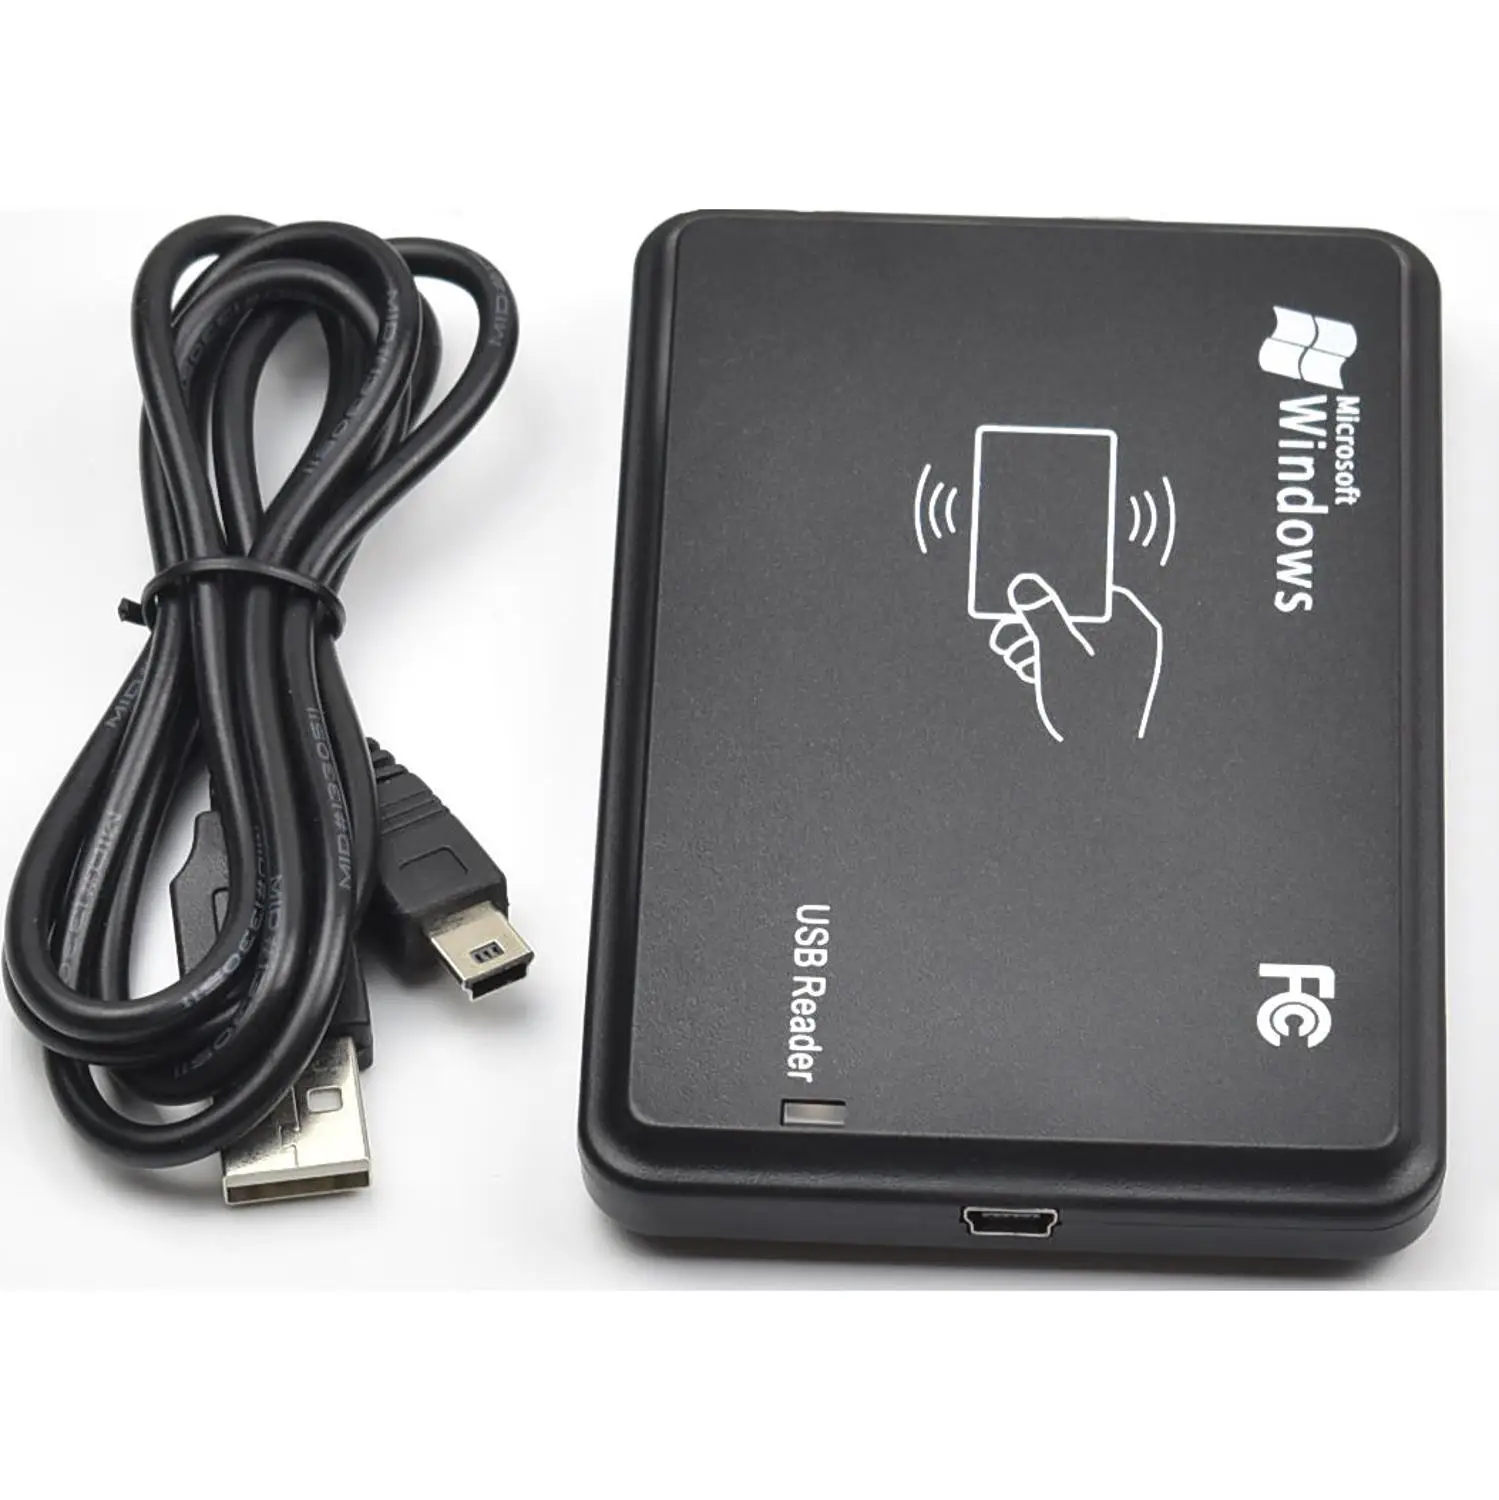 

13.56MHz Black USB Proximity Sensor Smart RFID NFC IC Card Reader 14443A with USB Cable no need Driver